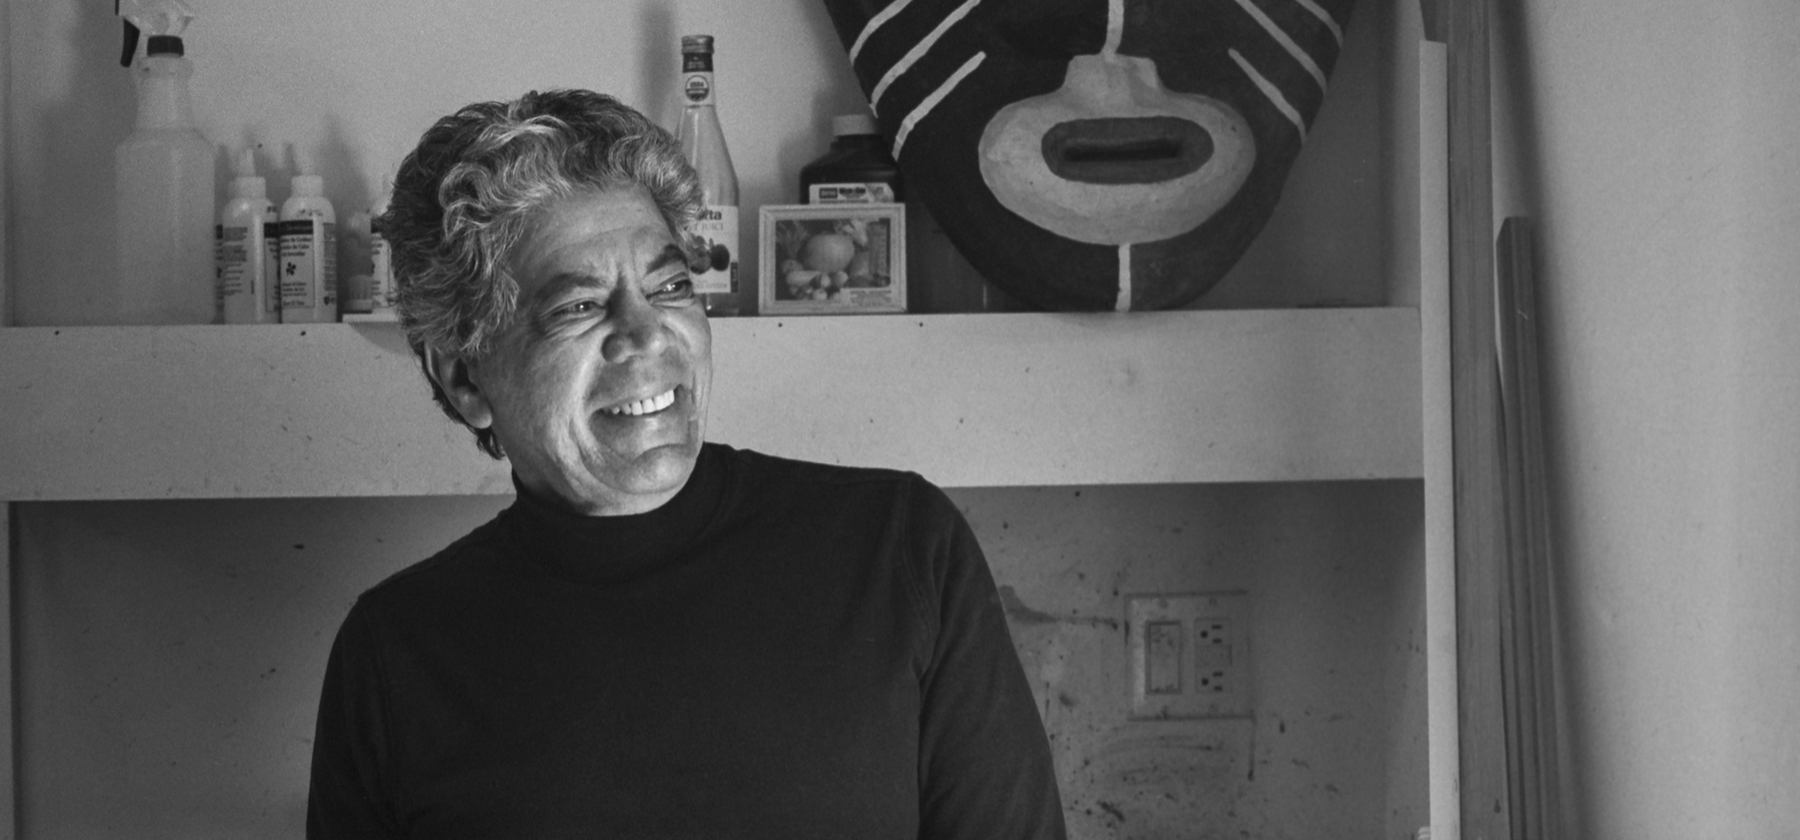 Photo of Freddy Rodriguez in his studio by Manolo Salas. 